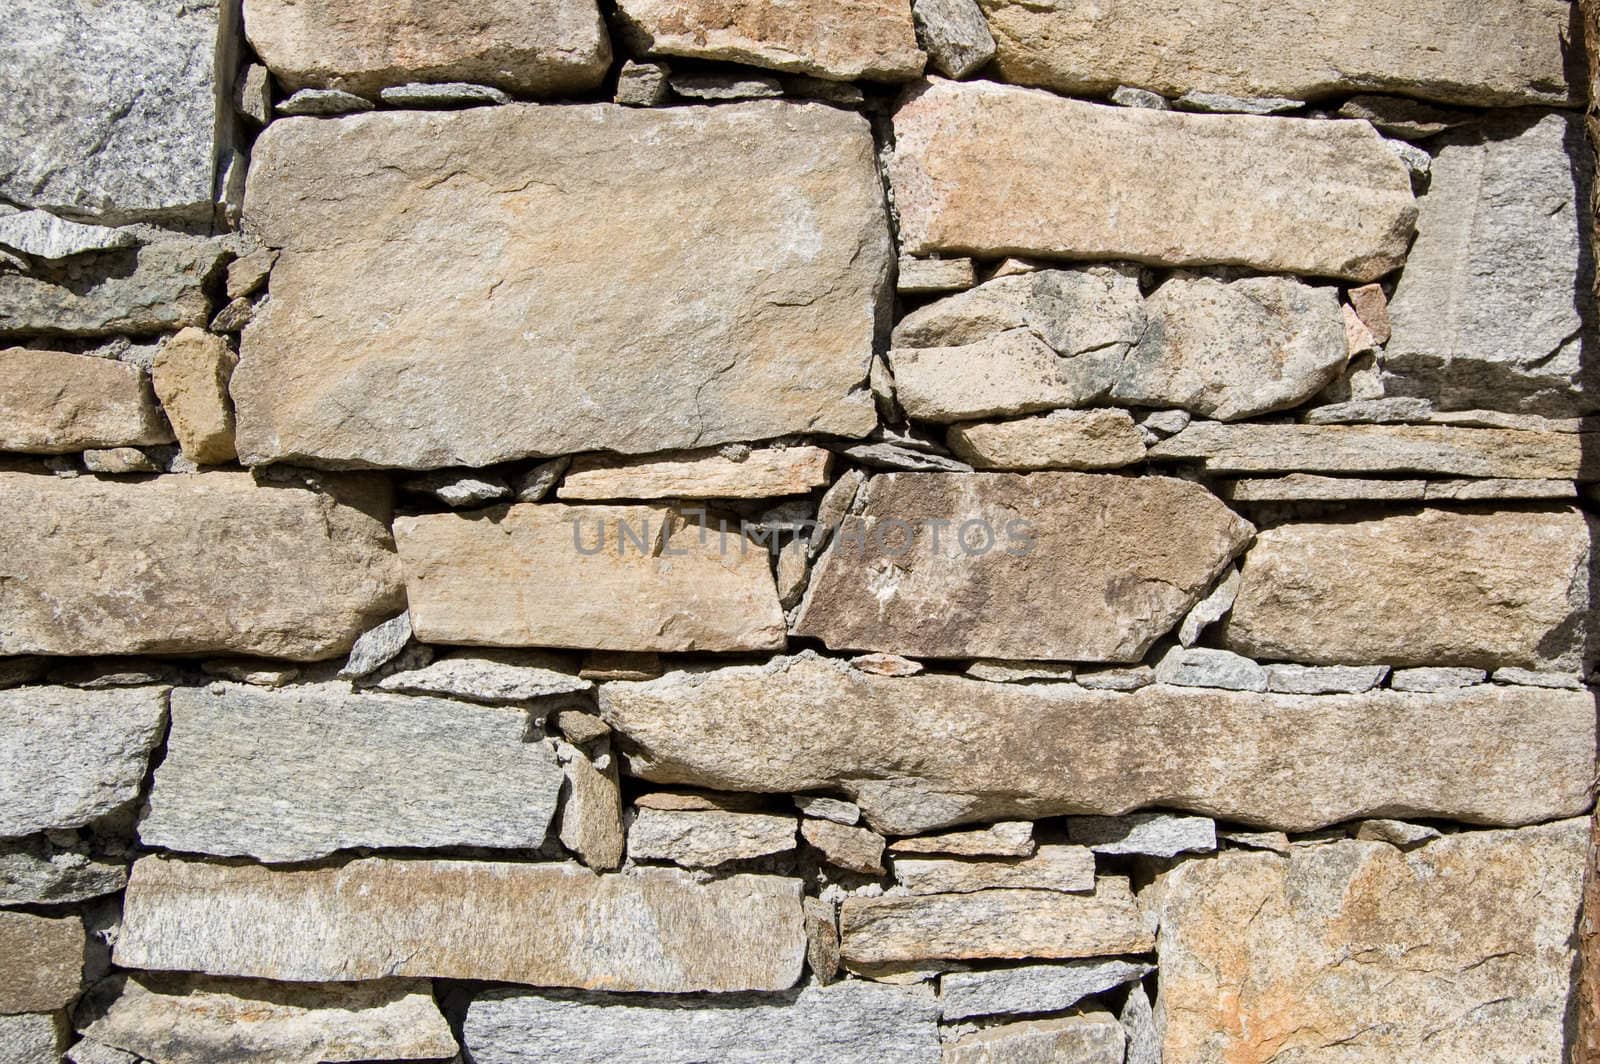 A wall of a rural mountain house made of stones